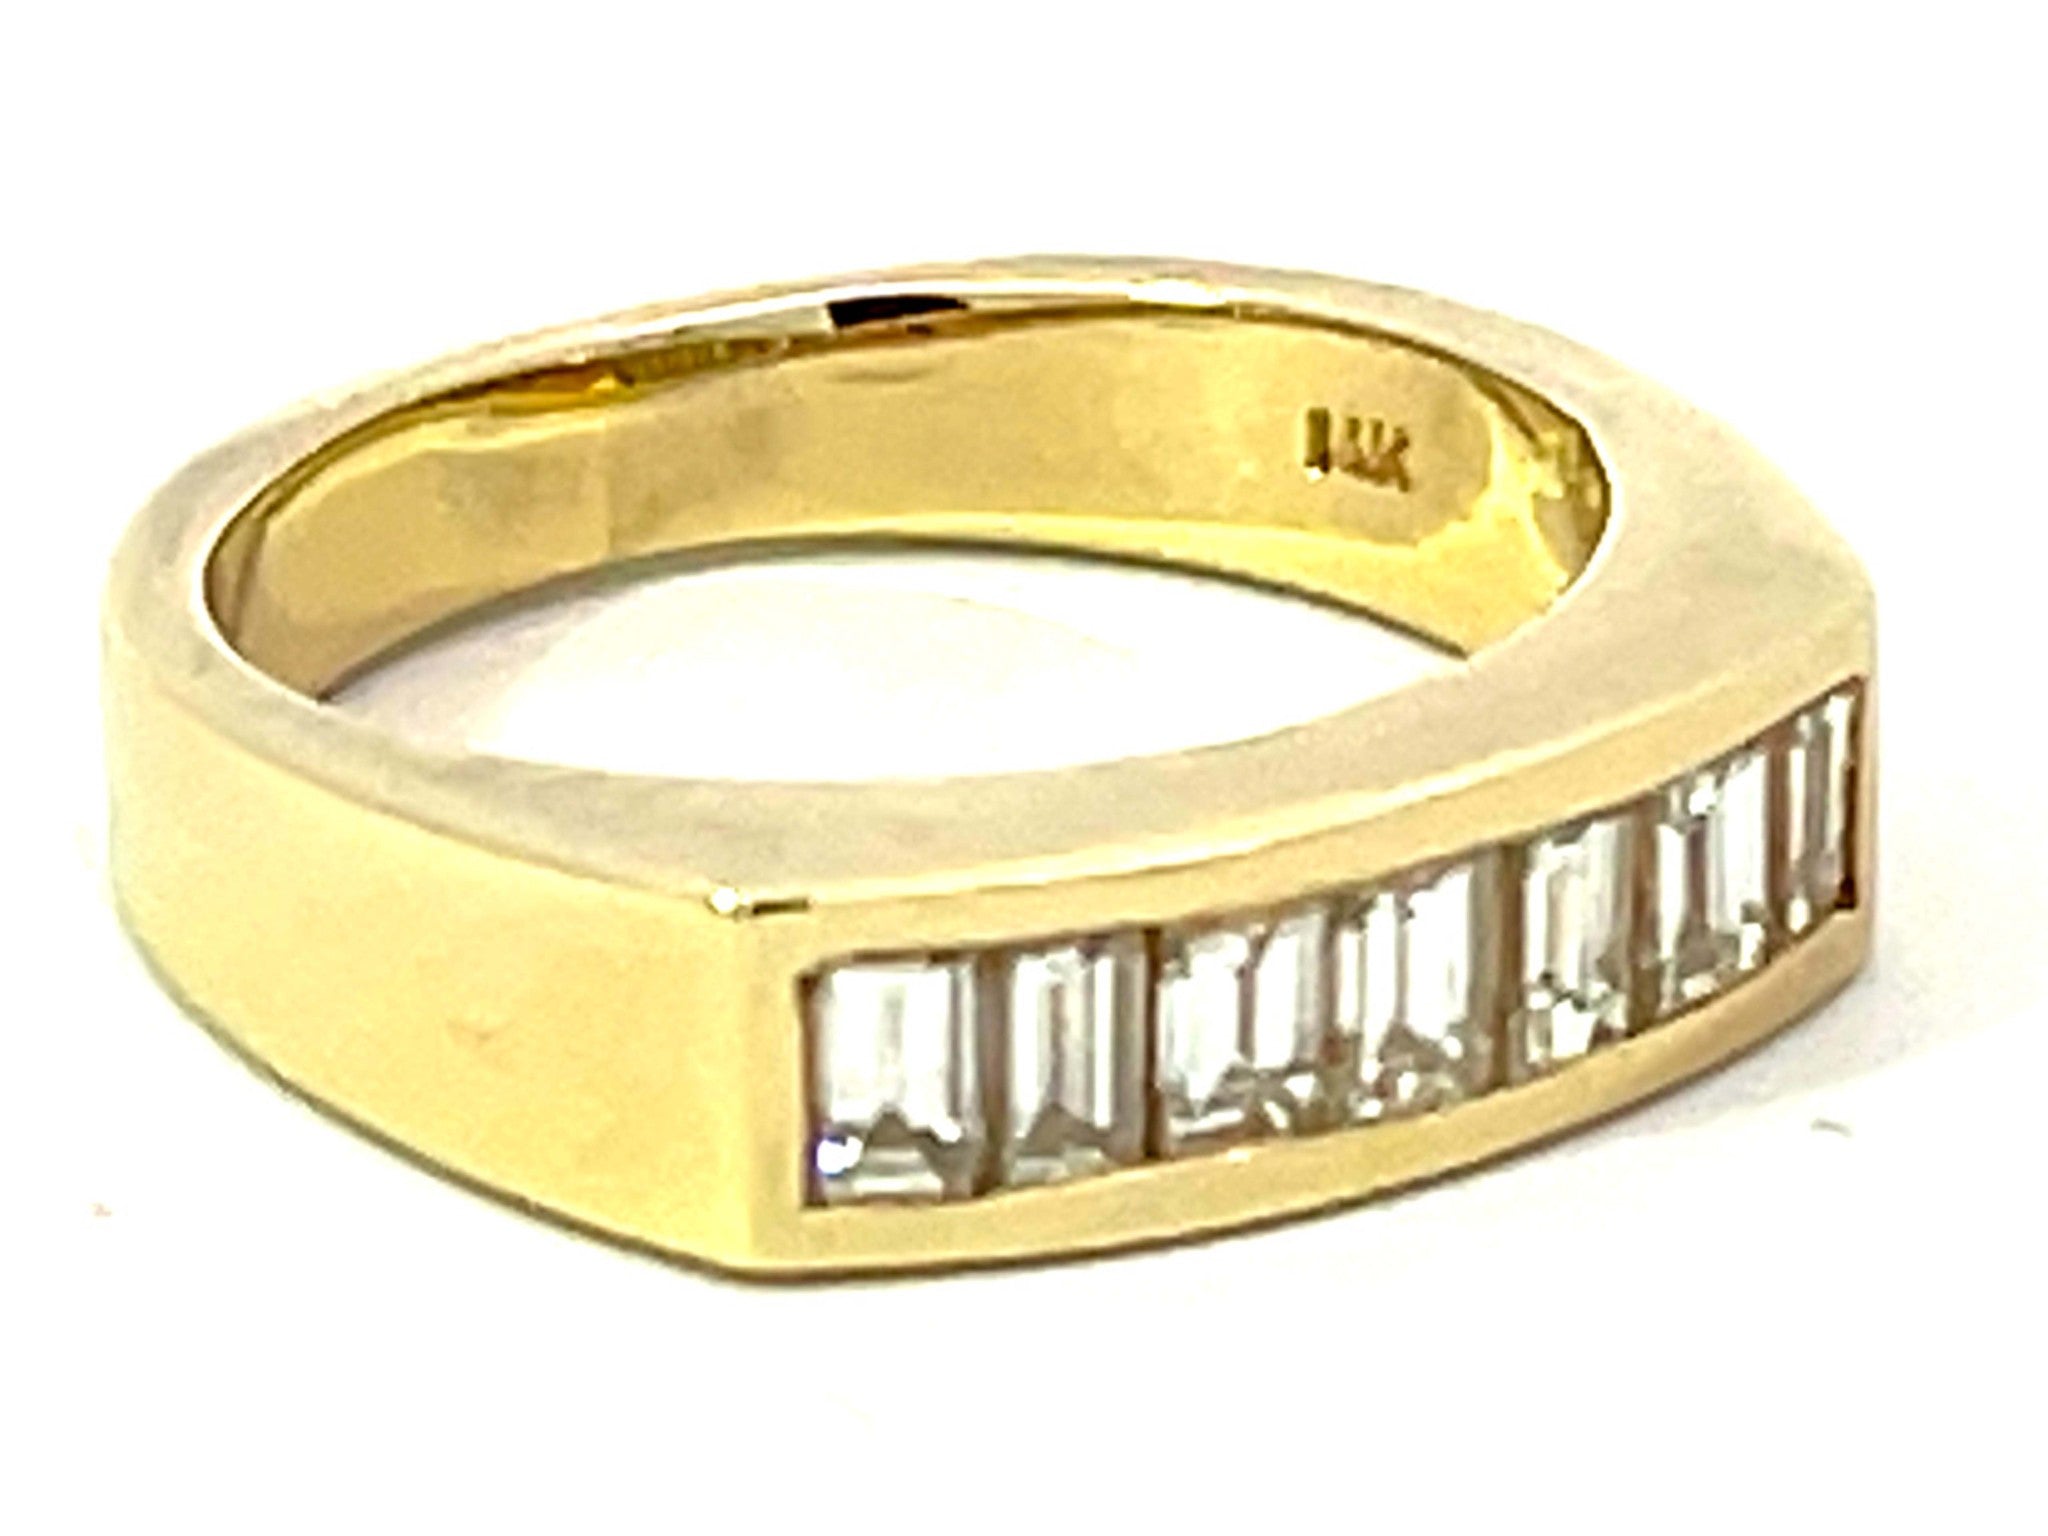 7 Channel Set Baguette Diamond Gold Band Ring in 14k Yellow Gold